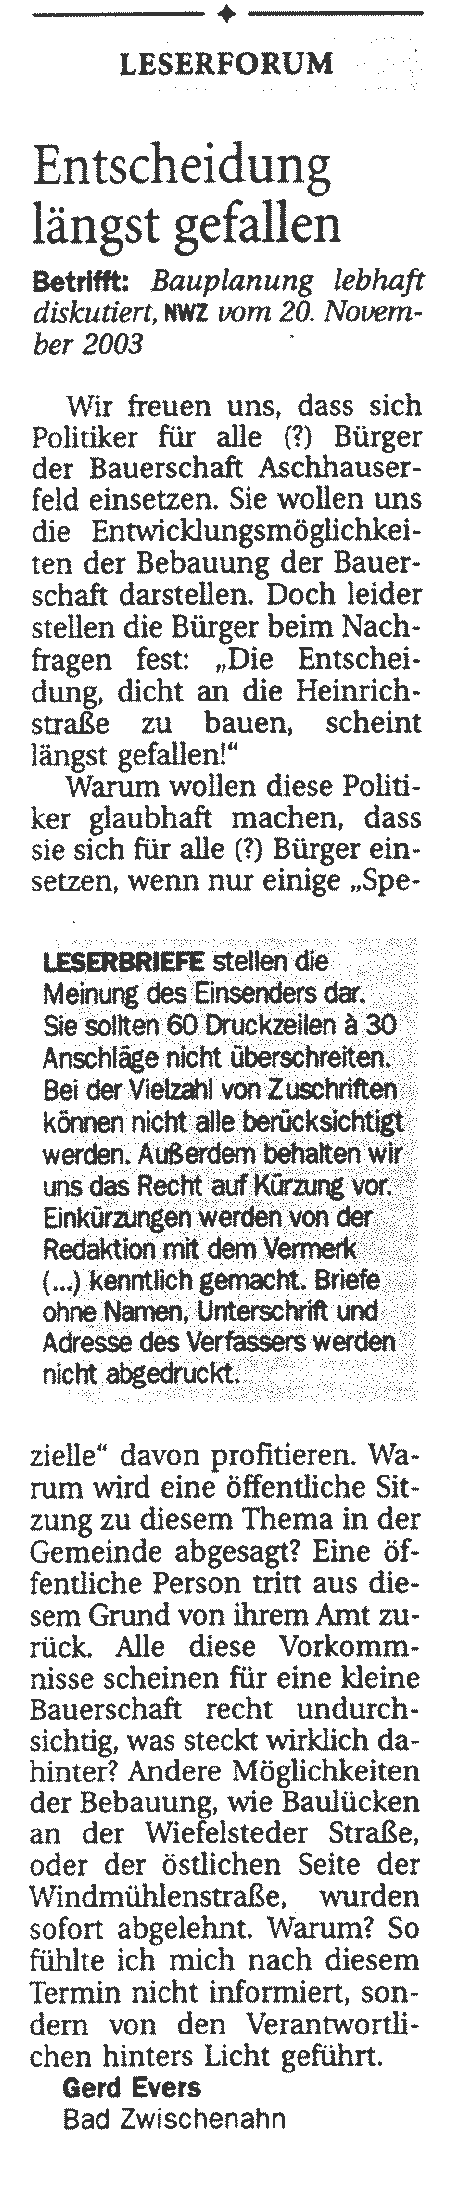 Leserbriefe am 12.12.2003